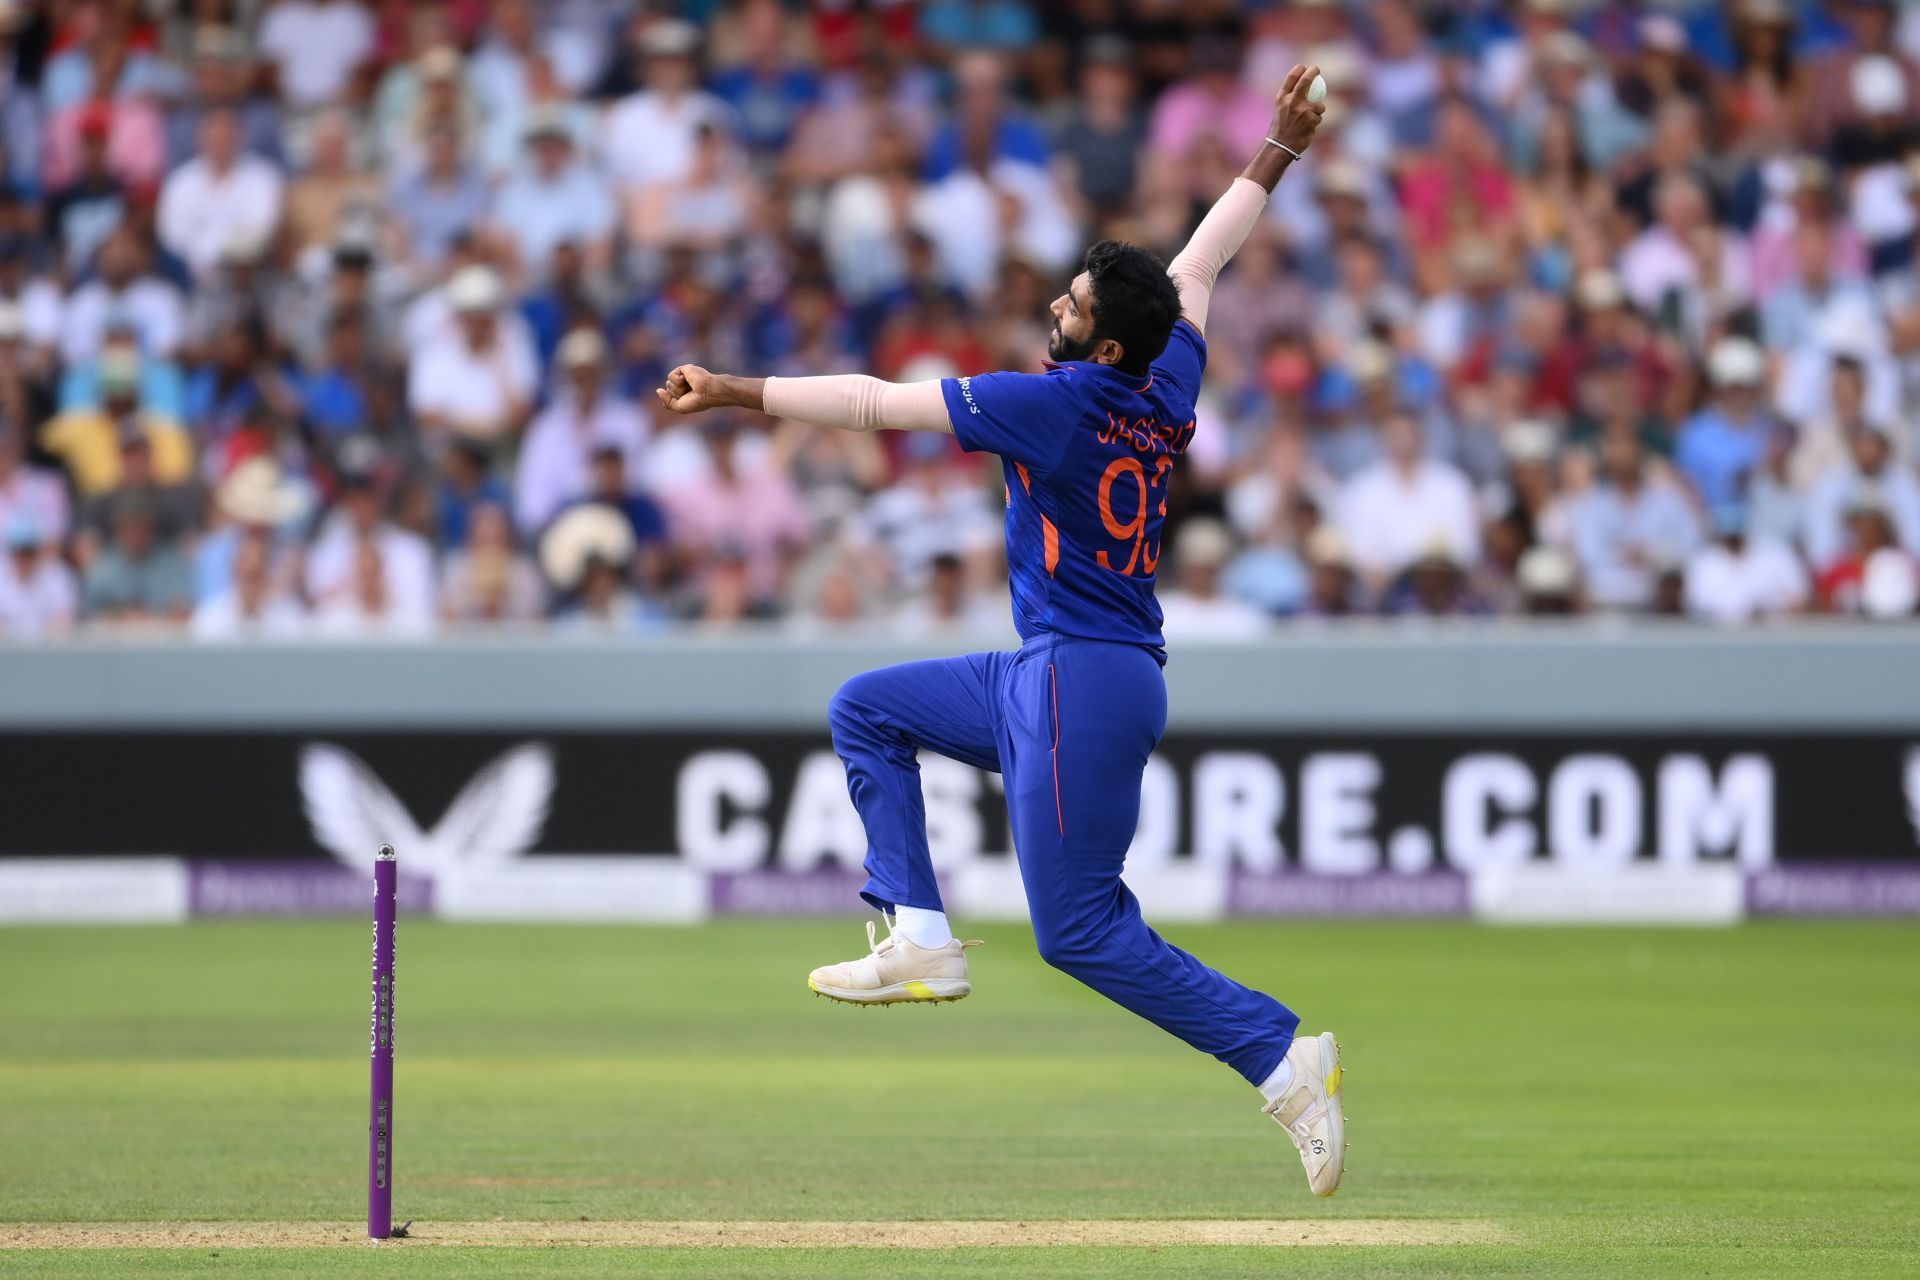 Jasprit Bumrah suffered a back injury during the limited-overs series against England